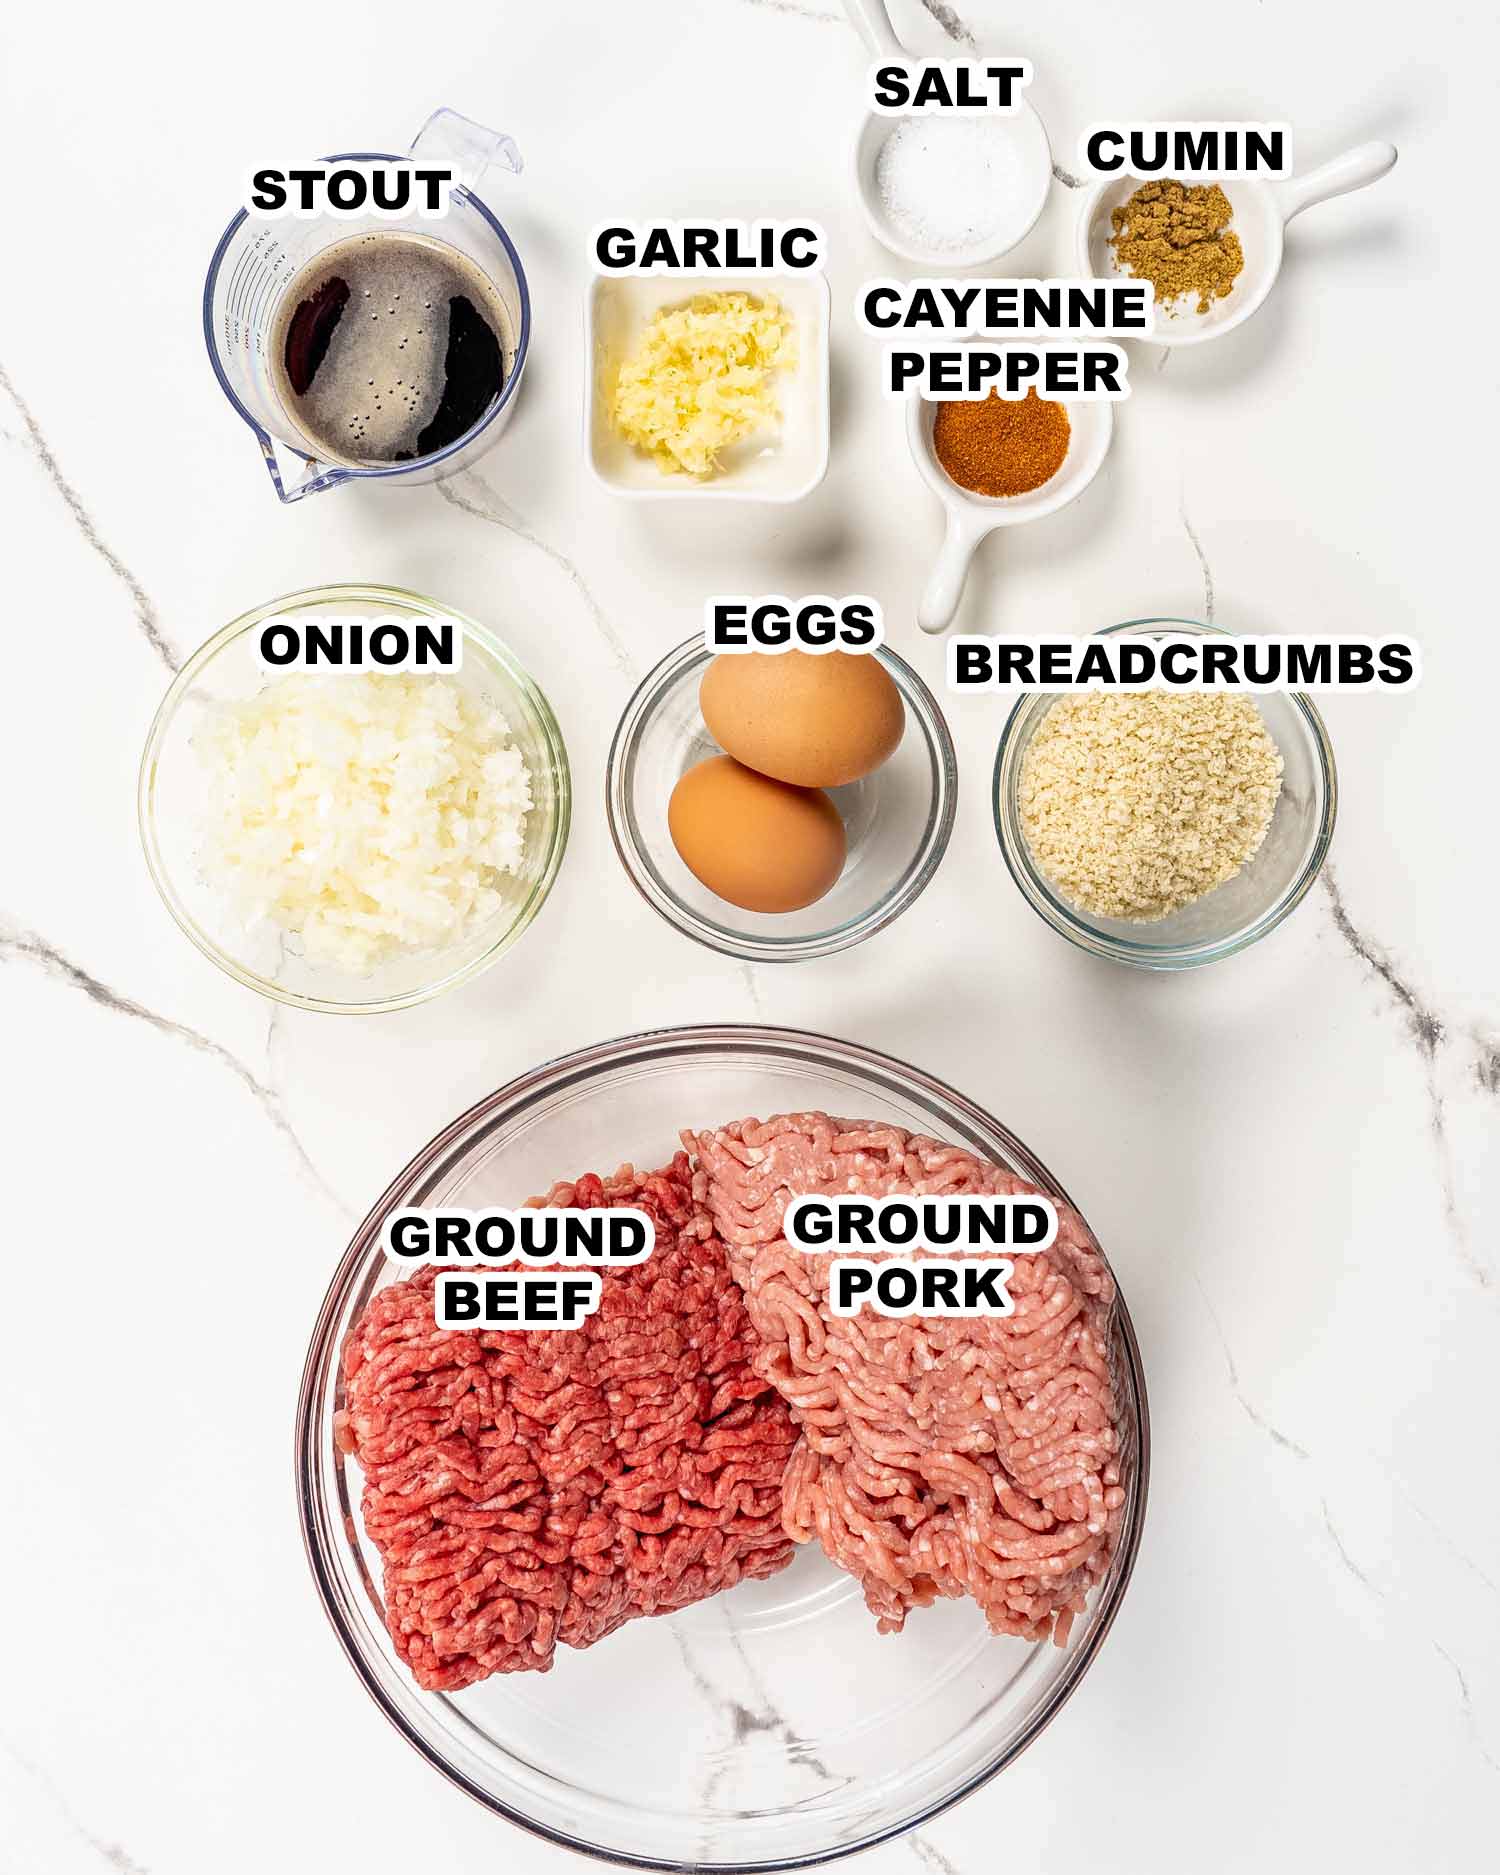 ingredients needed to make stout meatballs.